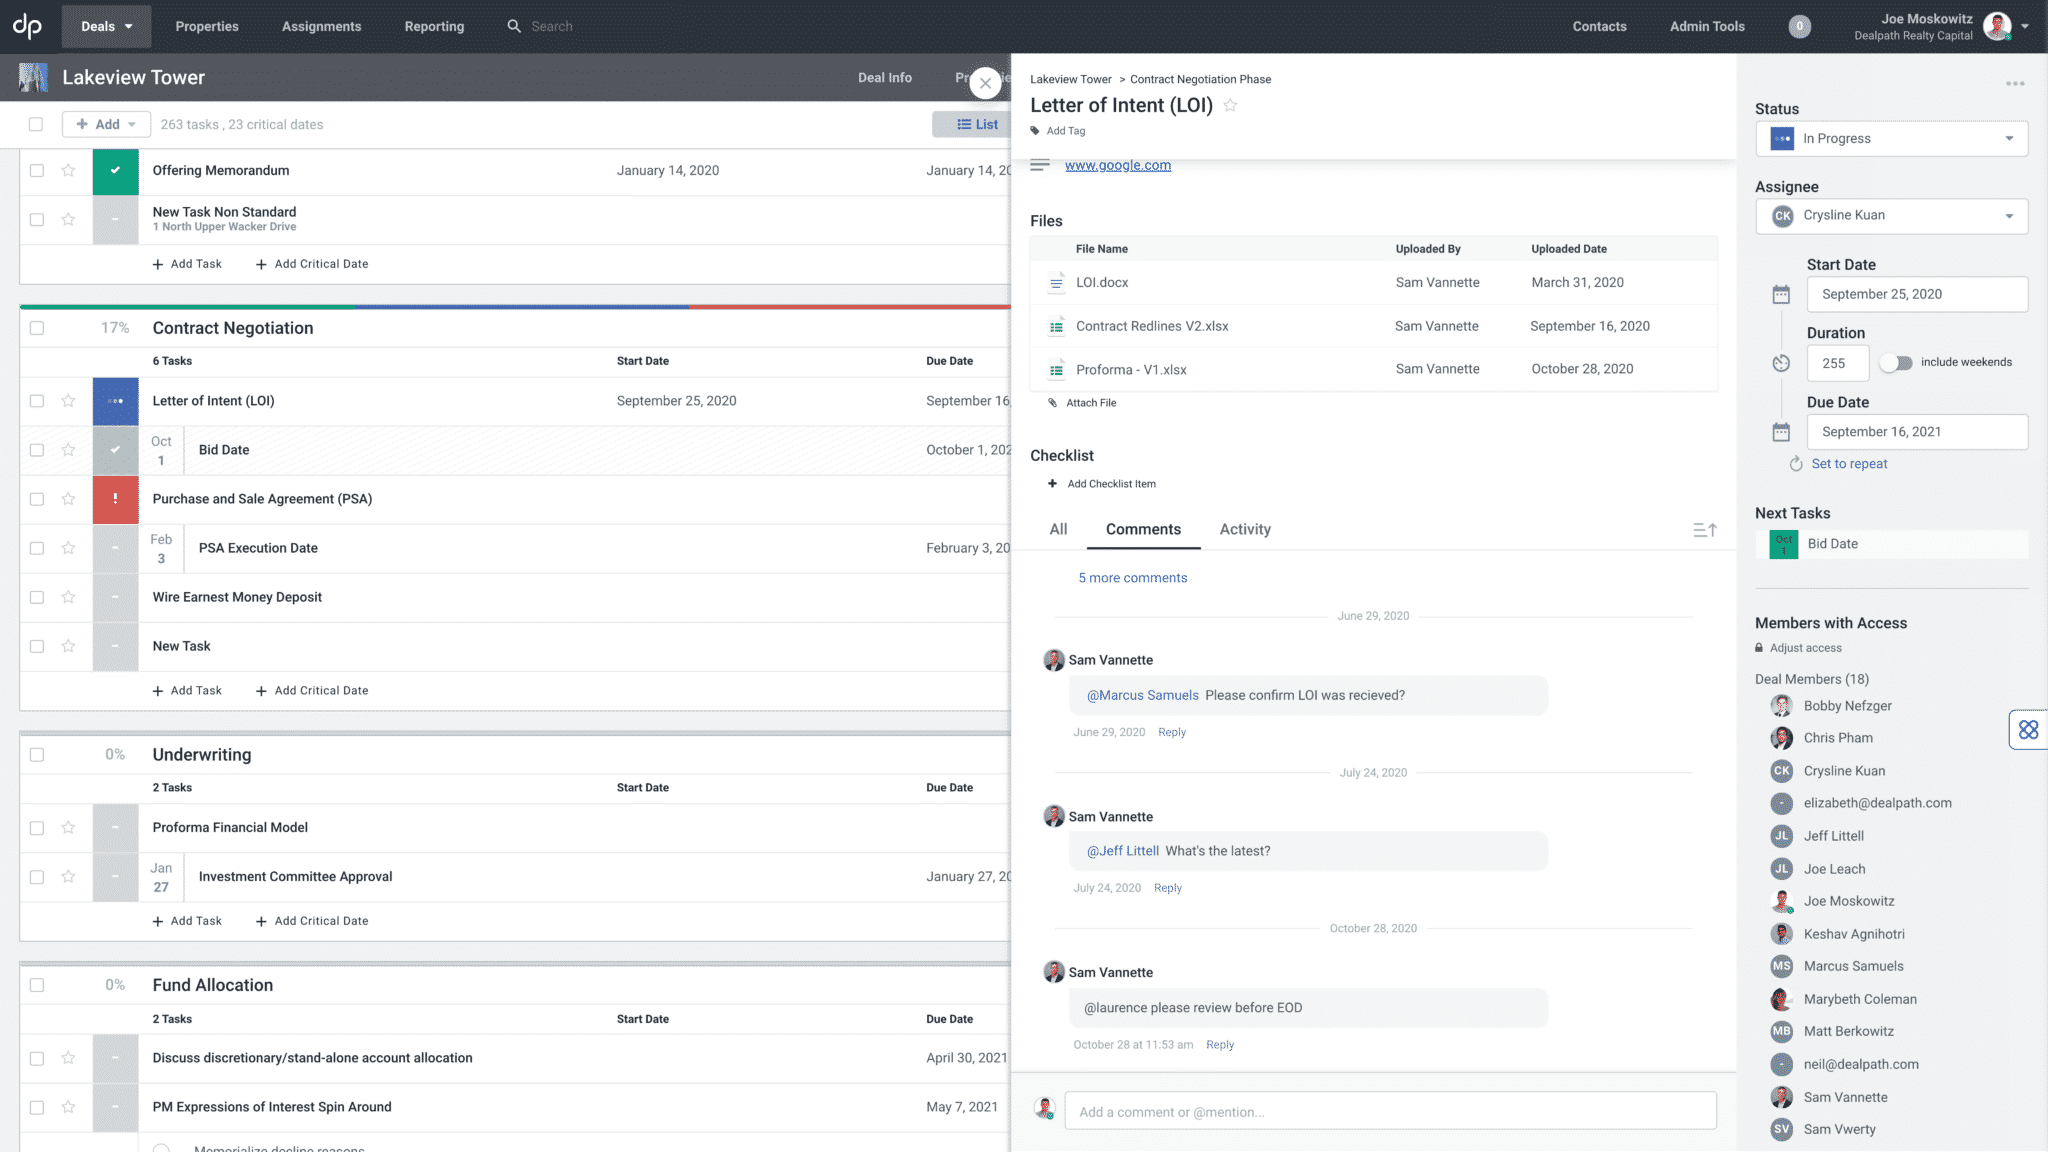 Monitor completed, upcoming and overdue tasks for every deal in real time